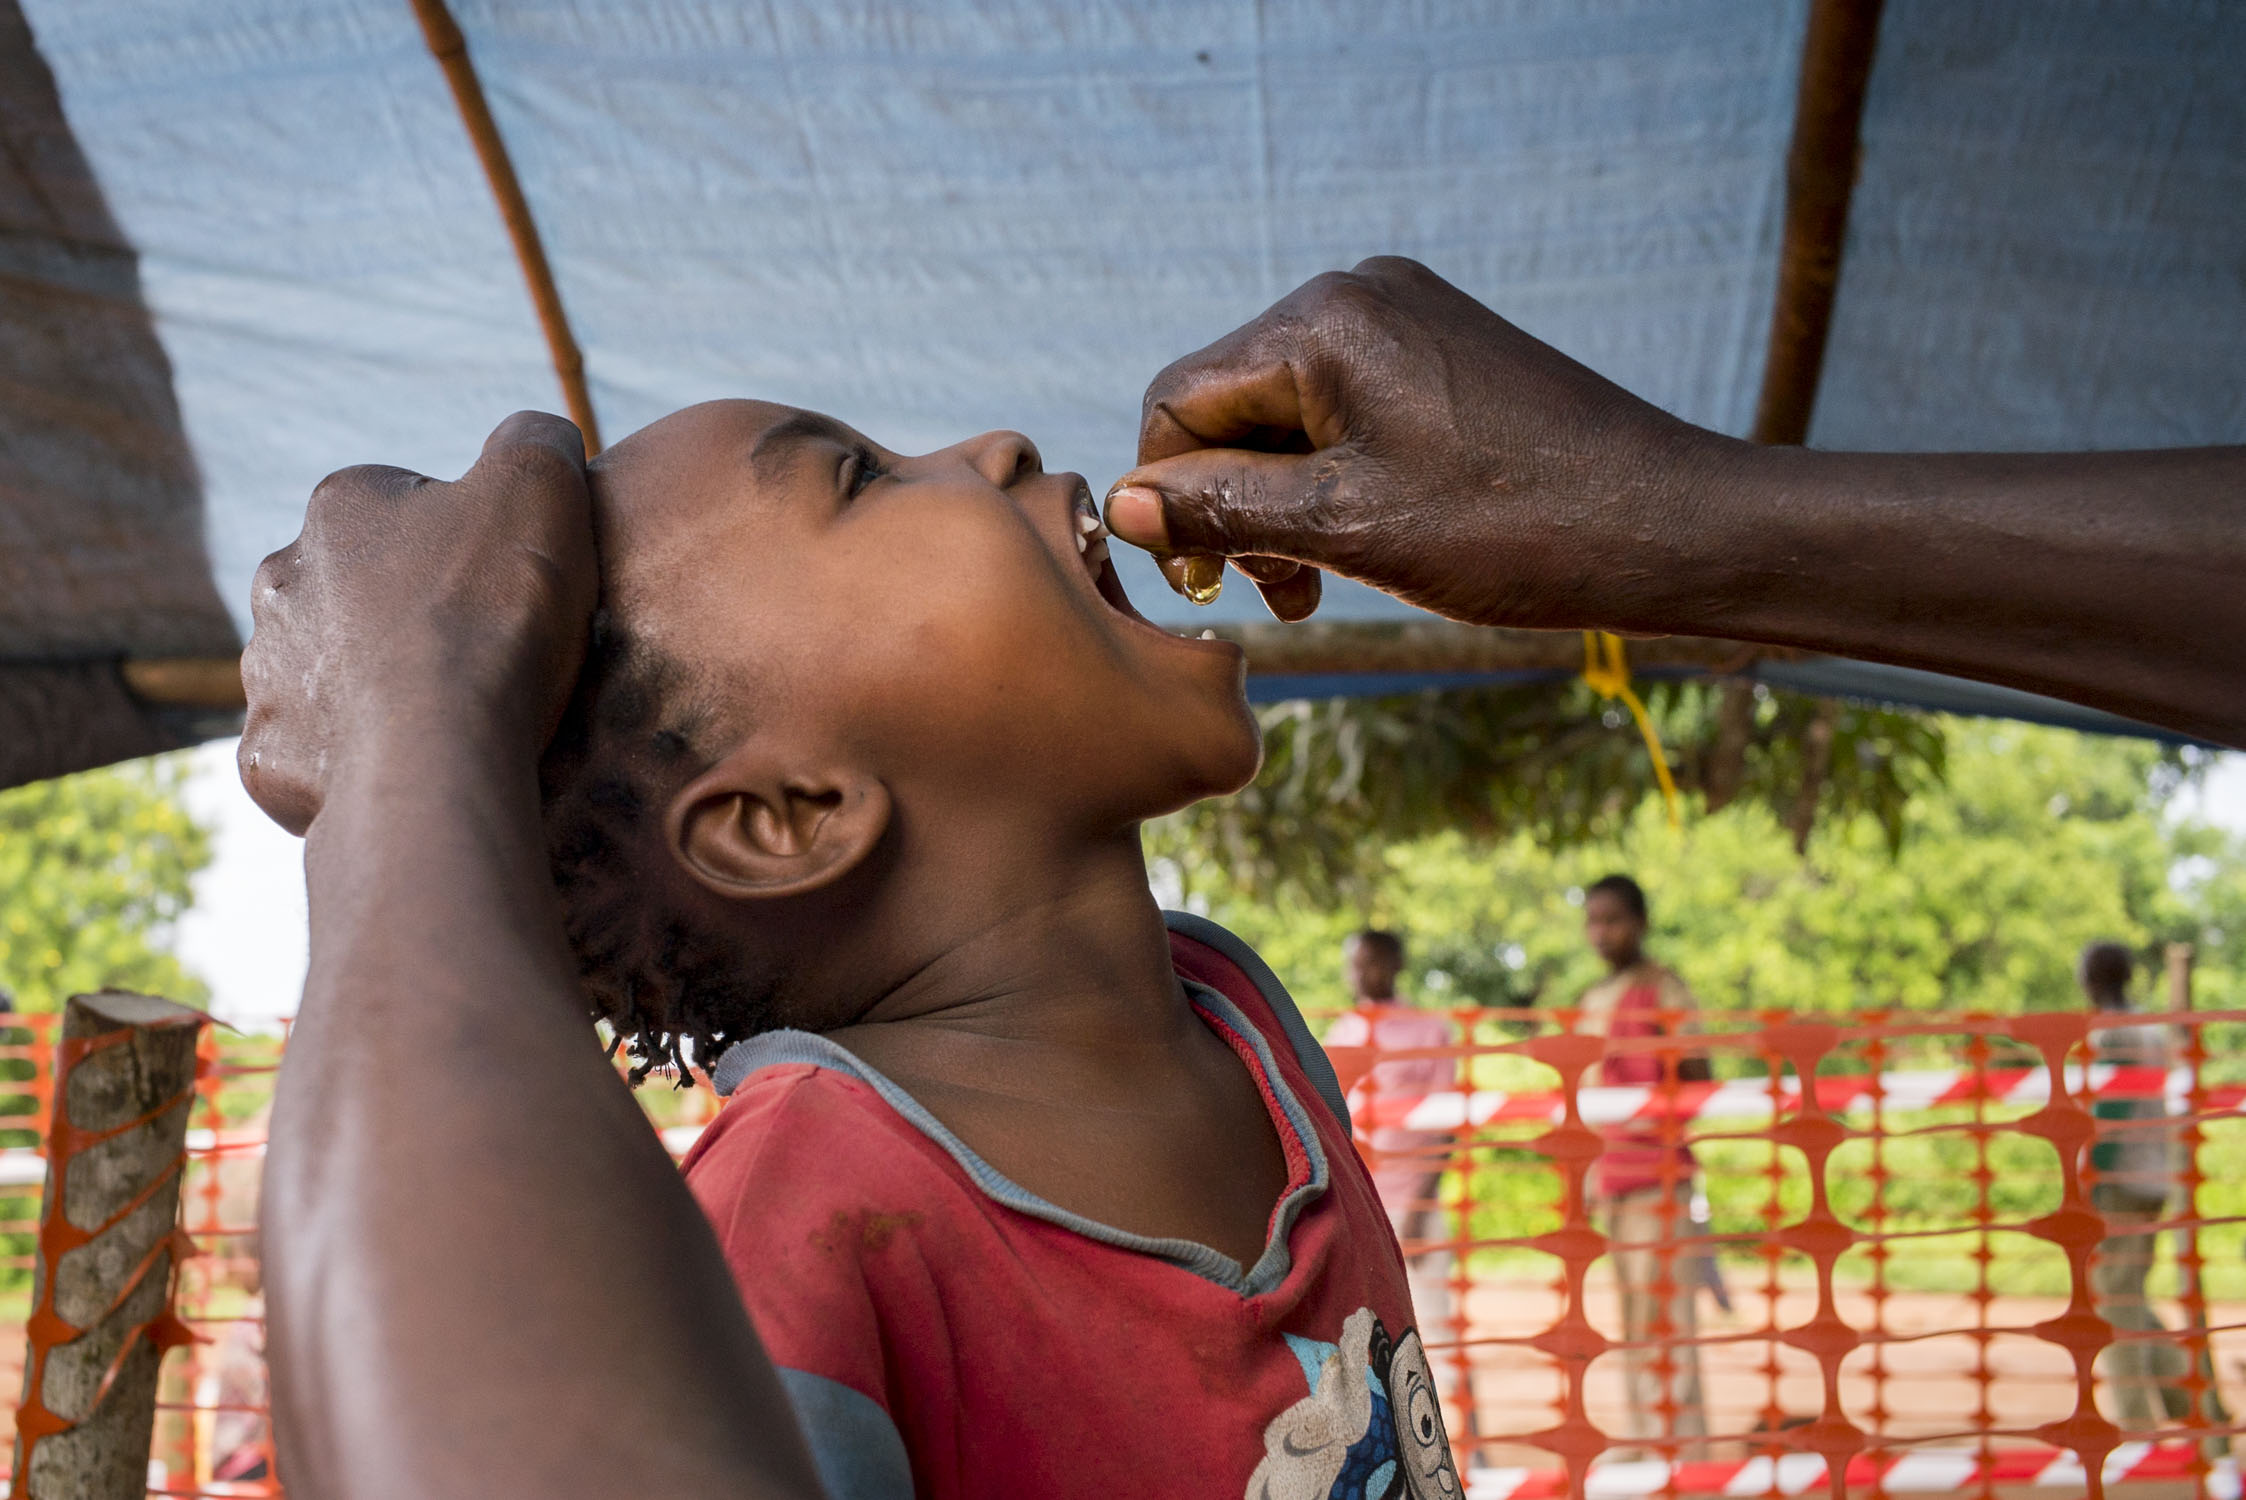  A young girl receives medicine during a 5-day measles vaccination campaign carried out by MSF in a region of Bas-Uele province of Democratic Republic of the Congo (DRC). MSF named measles among the top five epidemics that could erupt or worsen in 20